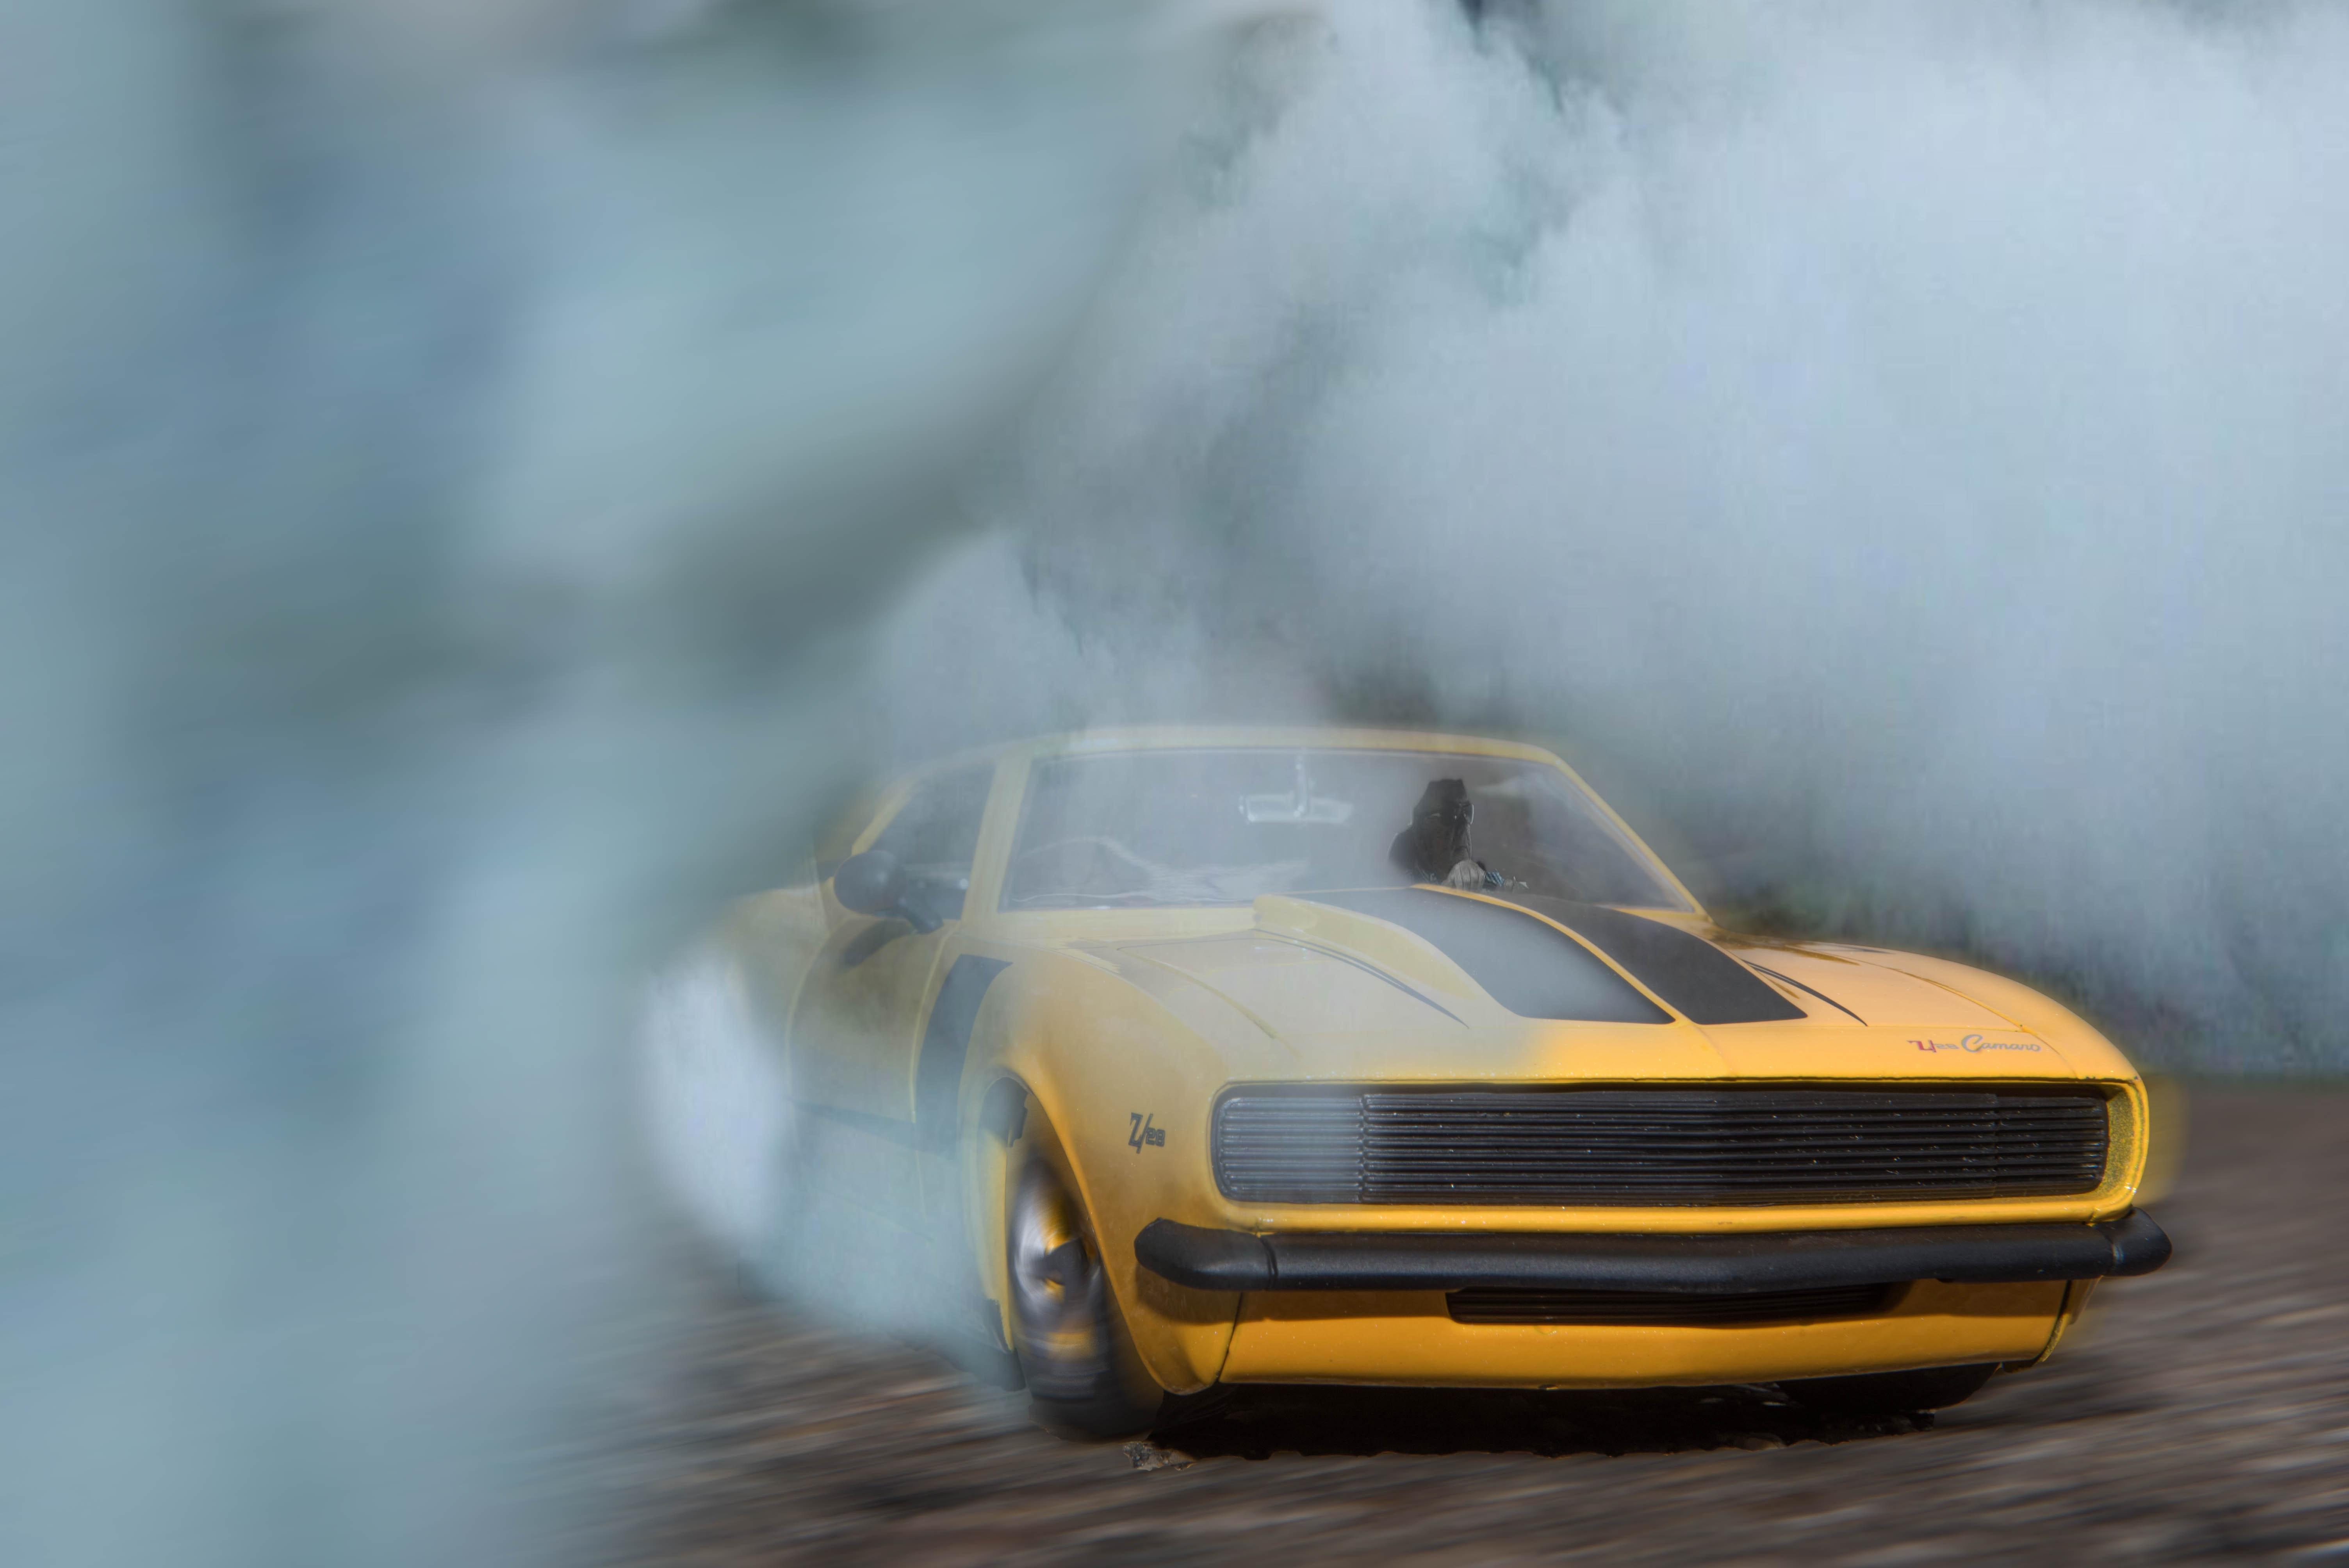 Classic Yellow And Black Sports Car Drifting On Road With Smoke